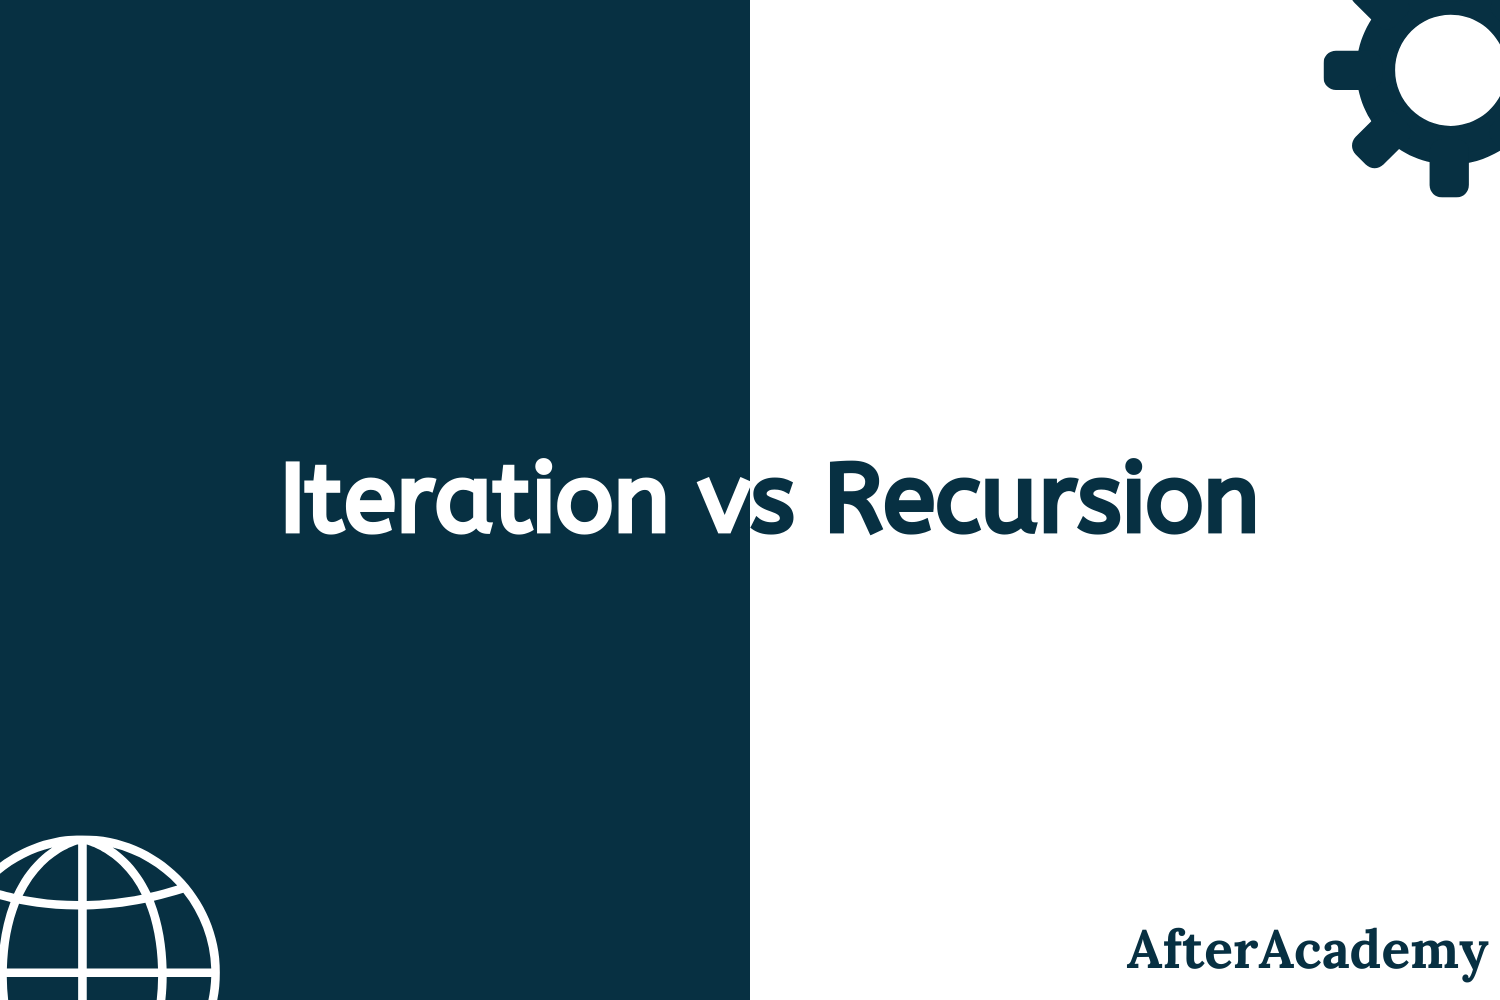 What is the difference between iteration and recursion?